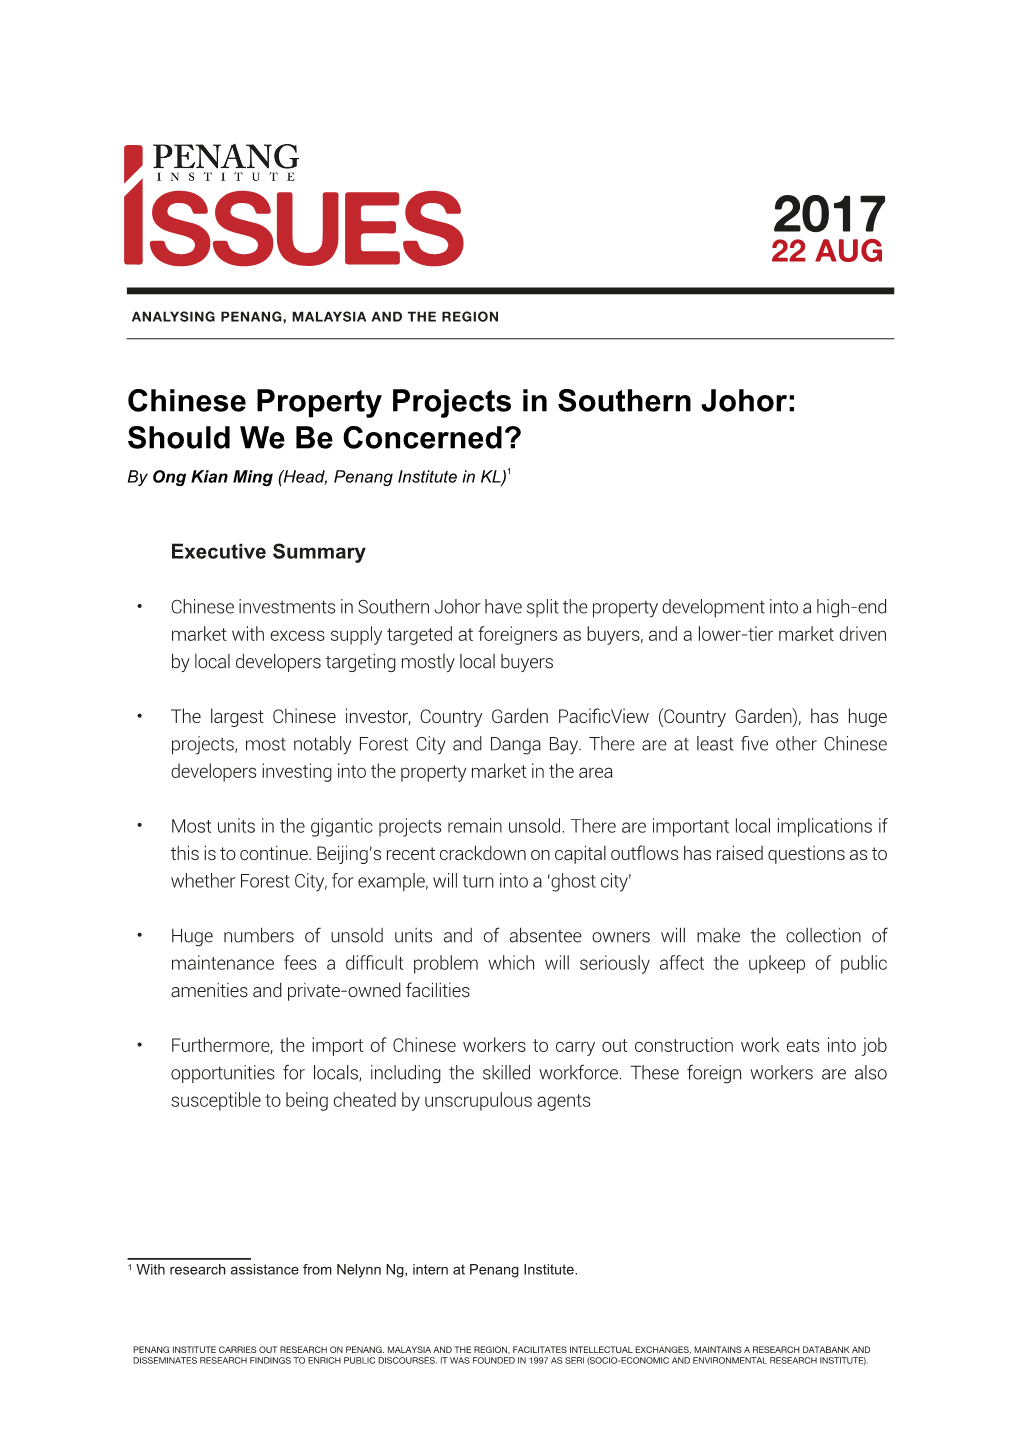 22 AUG Chinese Property Projects in Southern Johor